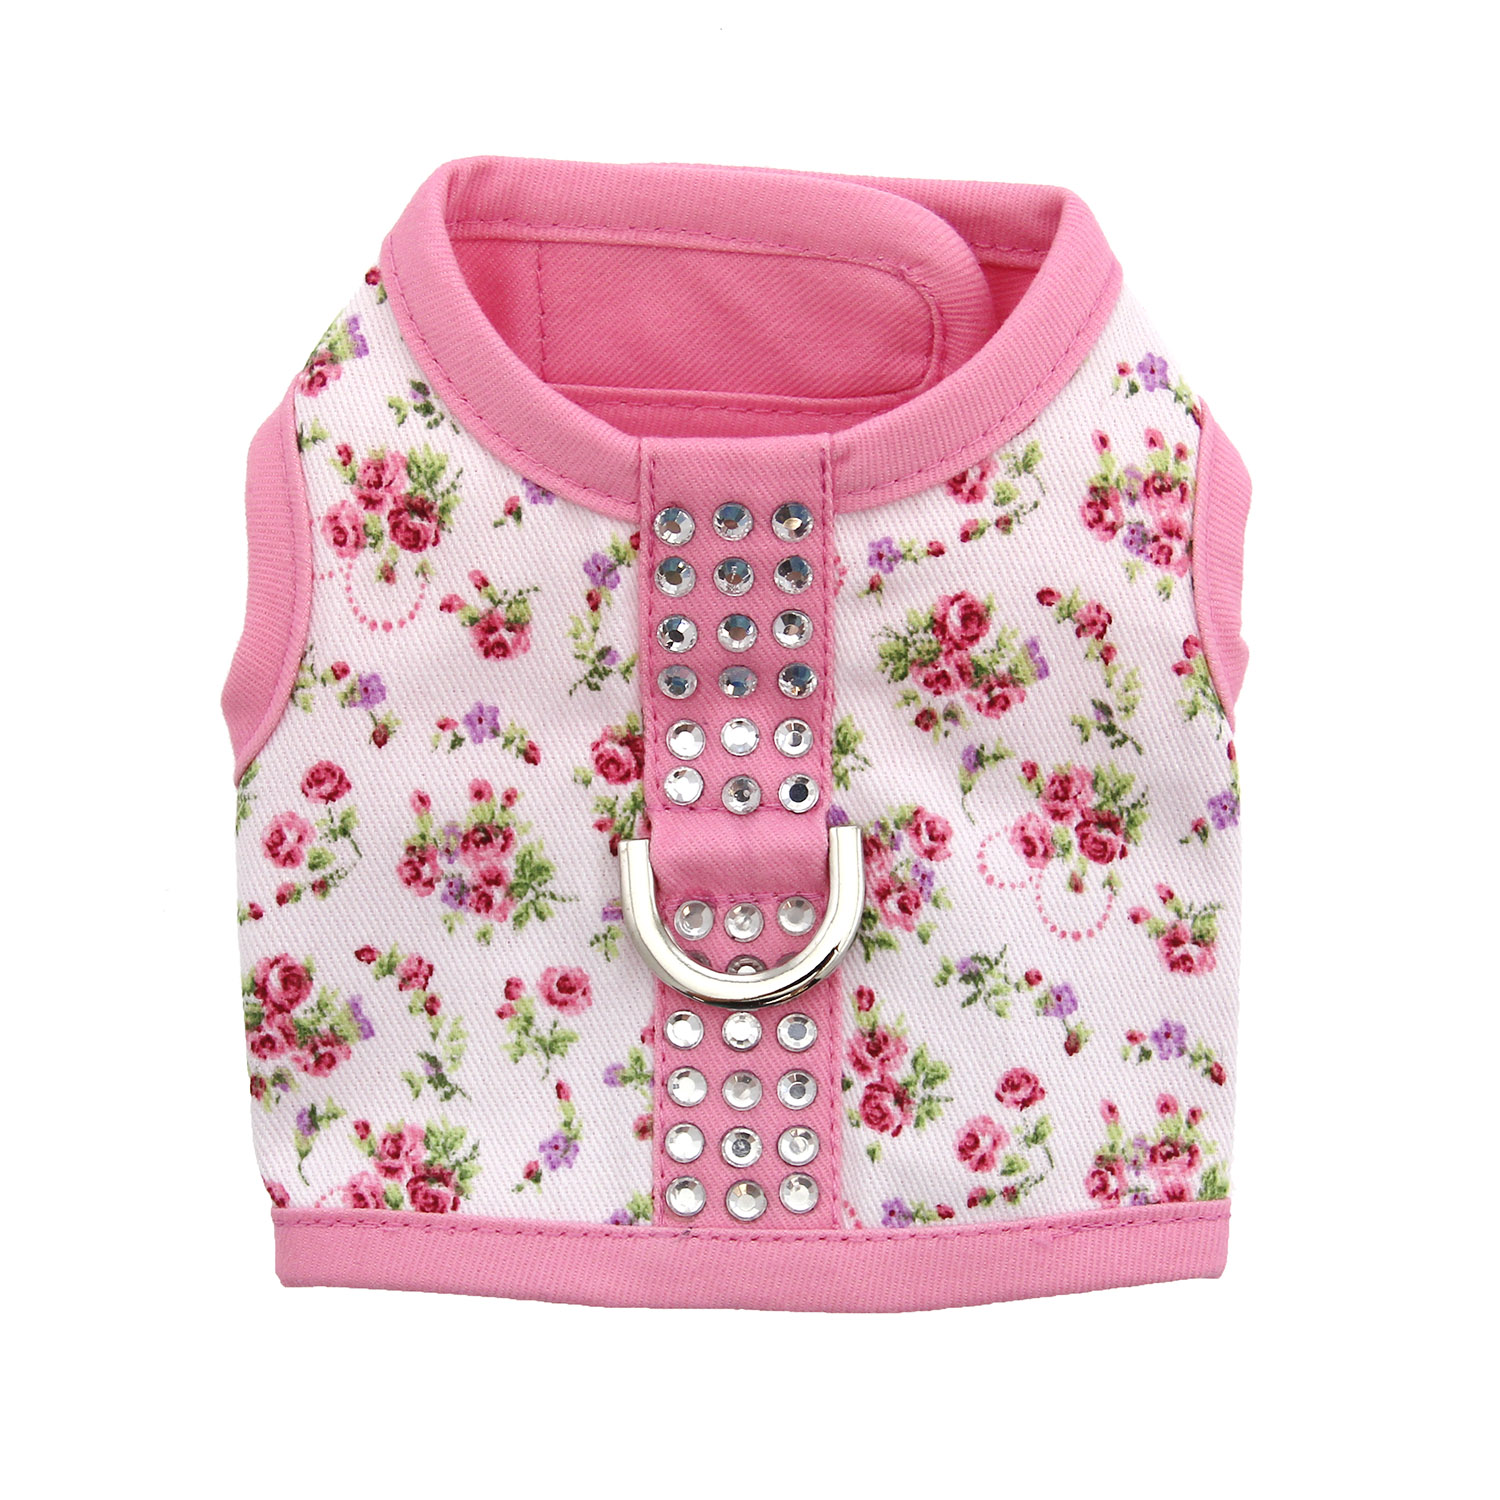 Pooch Outfitters Eva Pet Harness - Pink